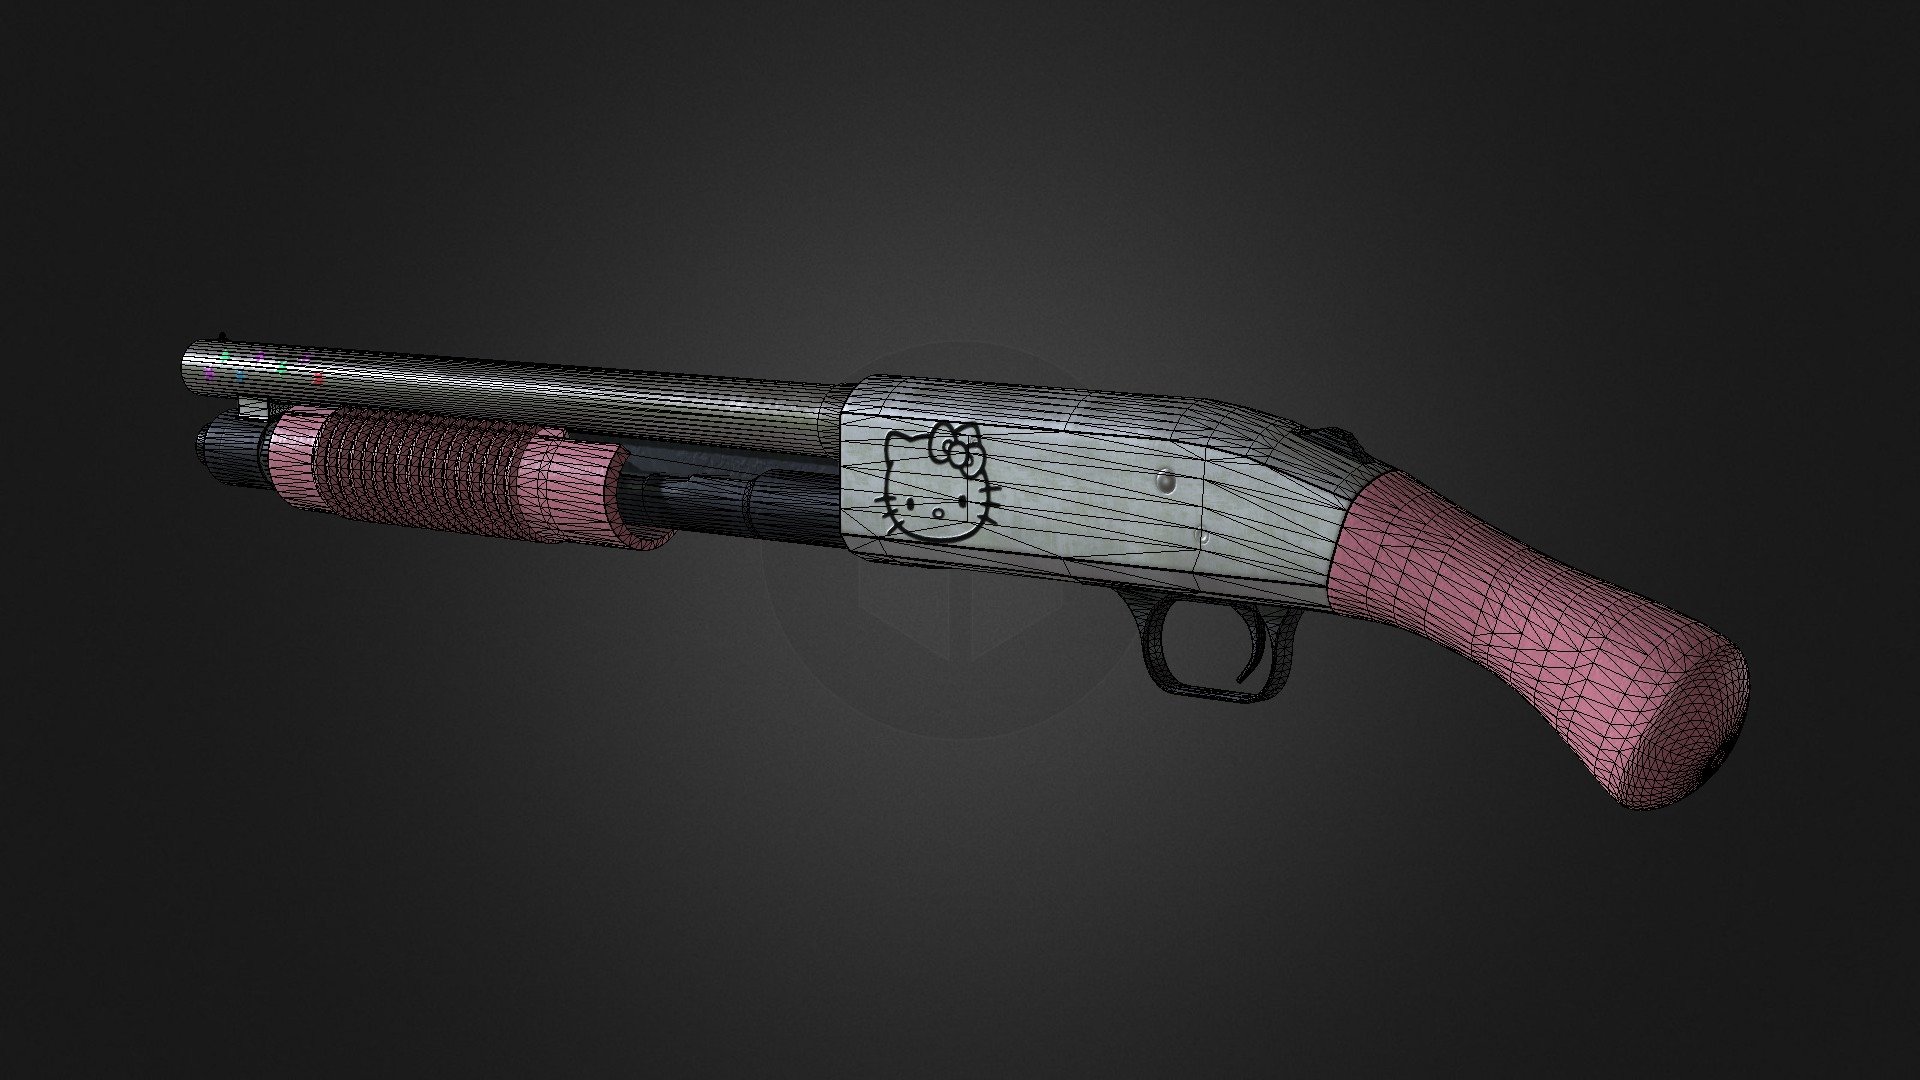 This is a custom Mossberg 590. This texture theme is Hello Kitty 3d model